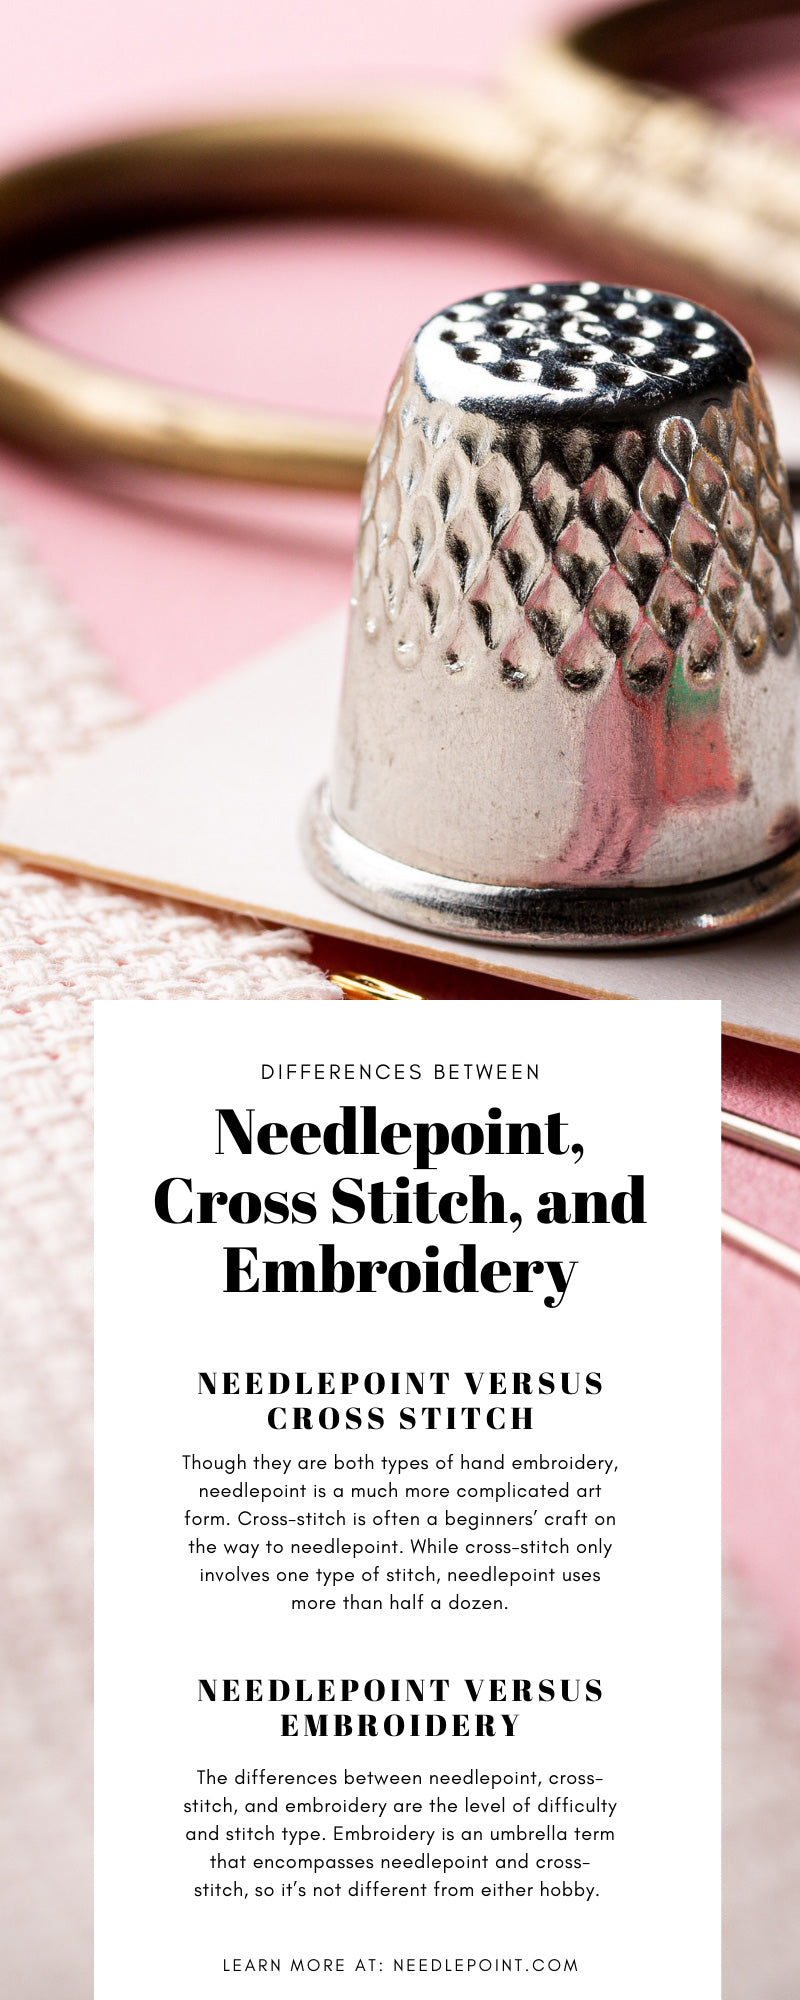 Needlepoint vs Cross Stitch [How are they different?] - Crewel Ghoul